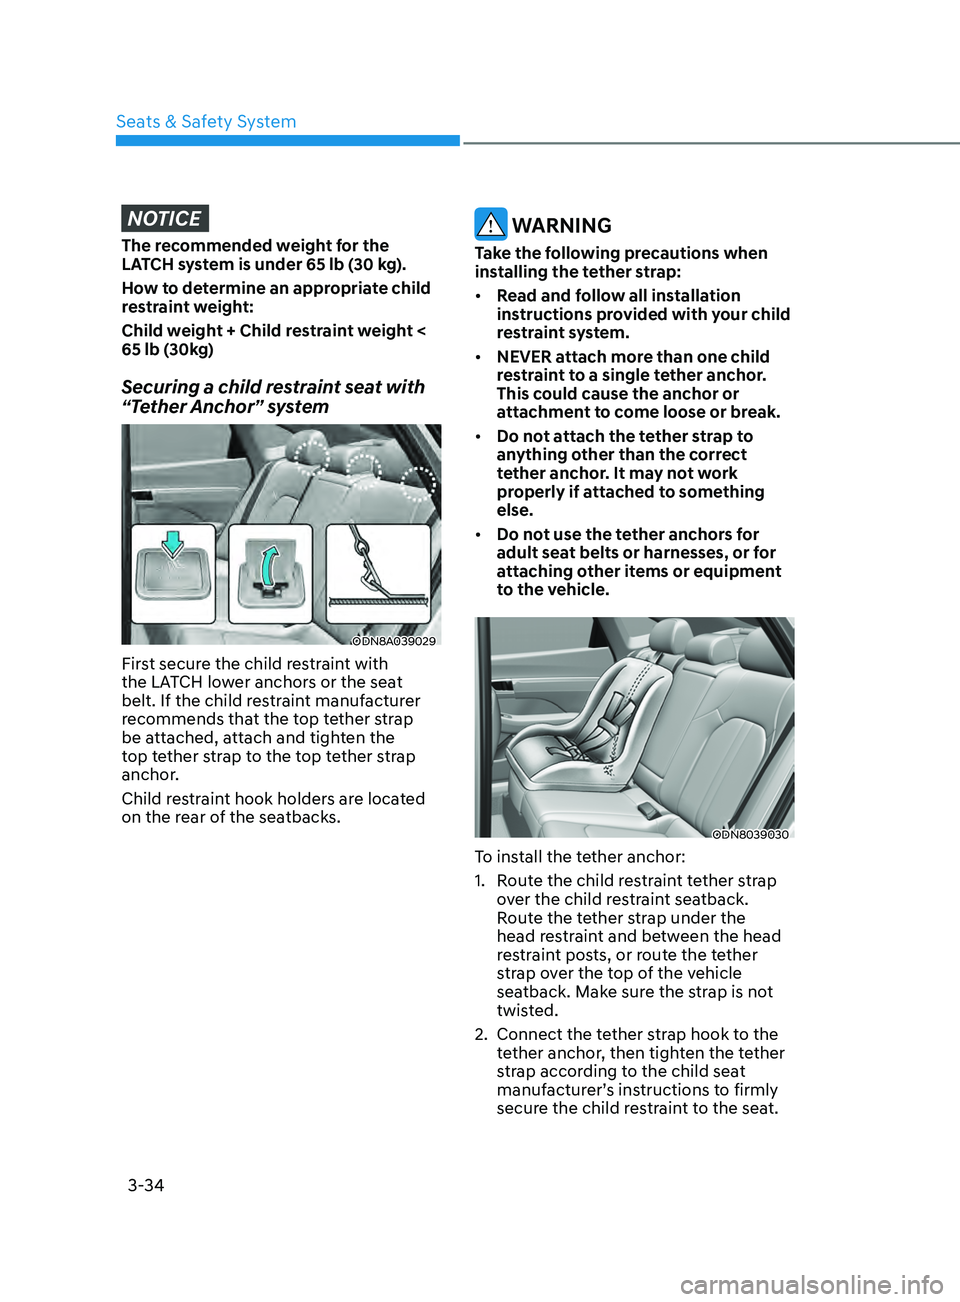 HYUNDAI SONATA 2021  Owners Manual 3-34
NOTICE
The recommended weight for the 
LATCH system is under 65 lb (30 kg).
How to determine an appropriate child 
restraint weight:
Child weight + Child restraint weight < 
65 lb (30kg)
Securing